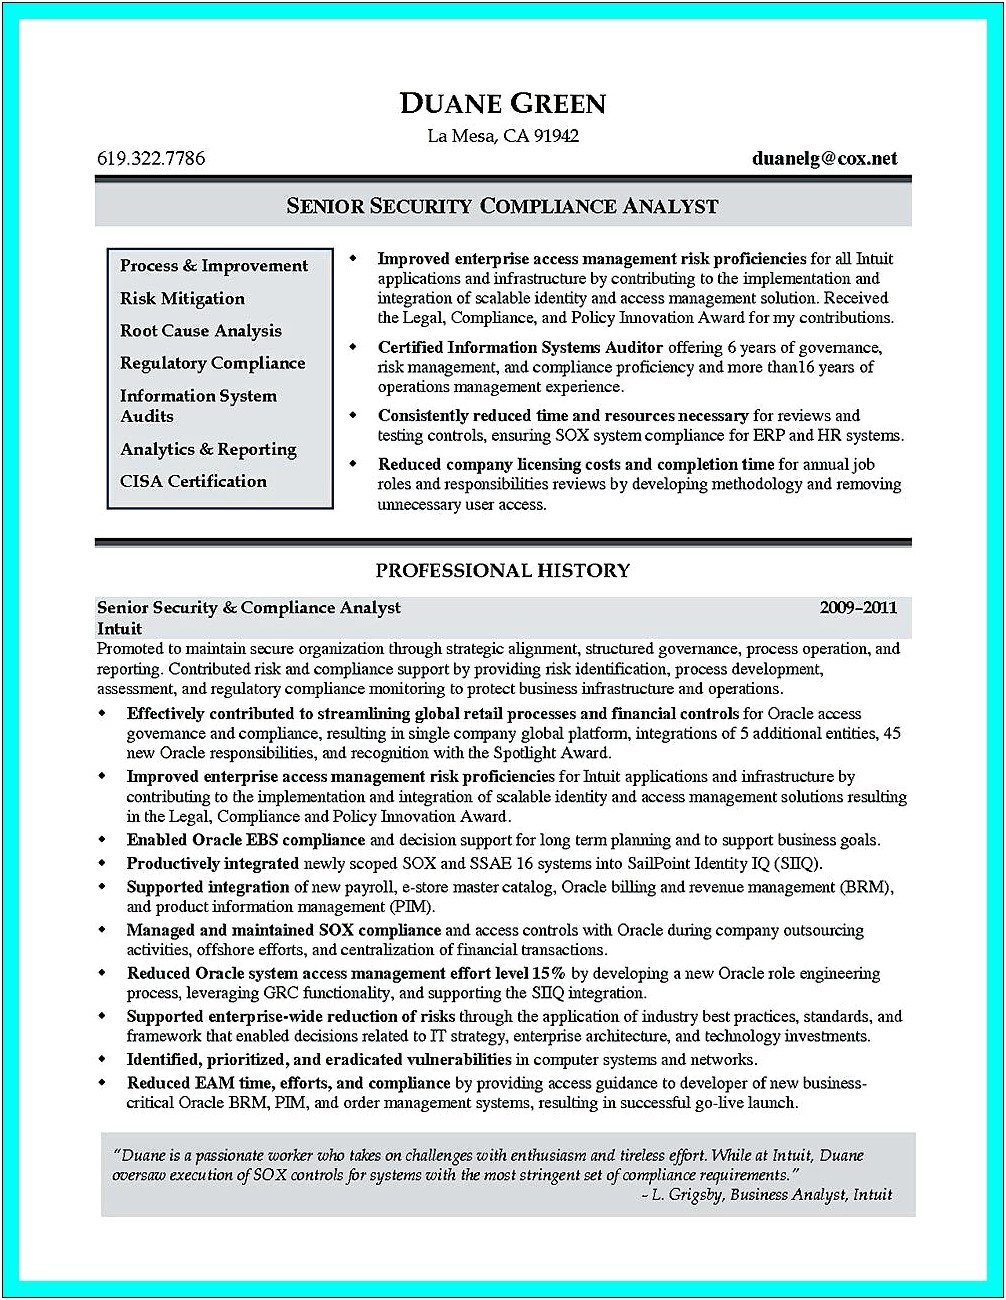 Resume Objective For Compliance Analyst